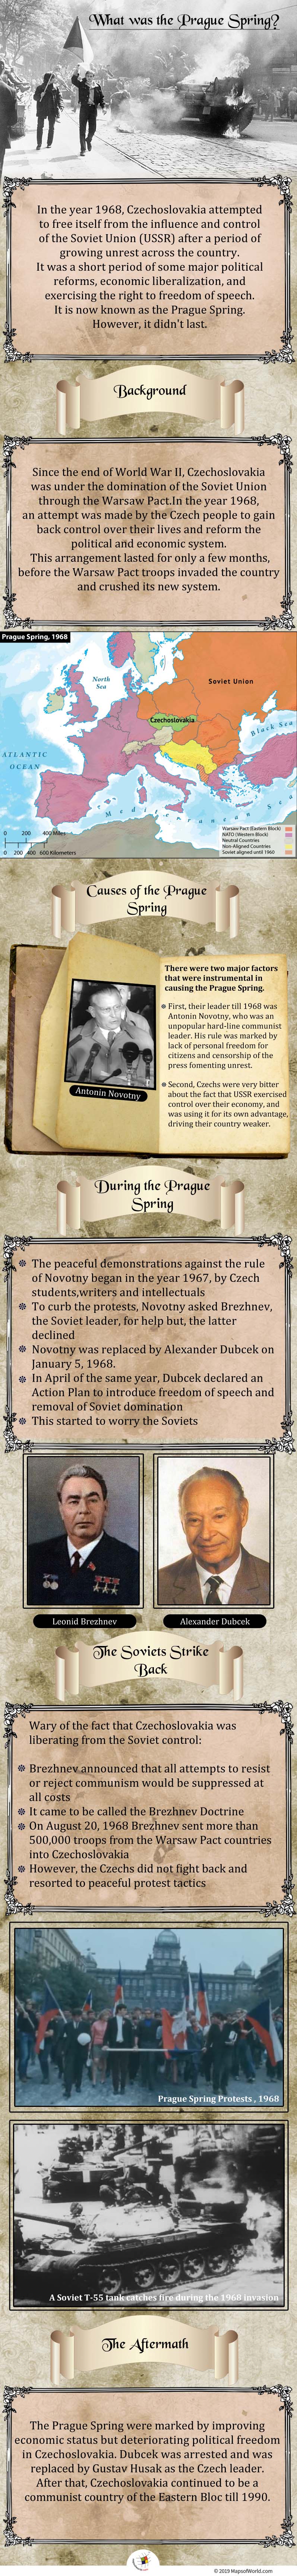 Infographic Giving Details on The Prague Spring